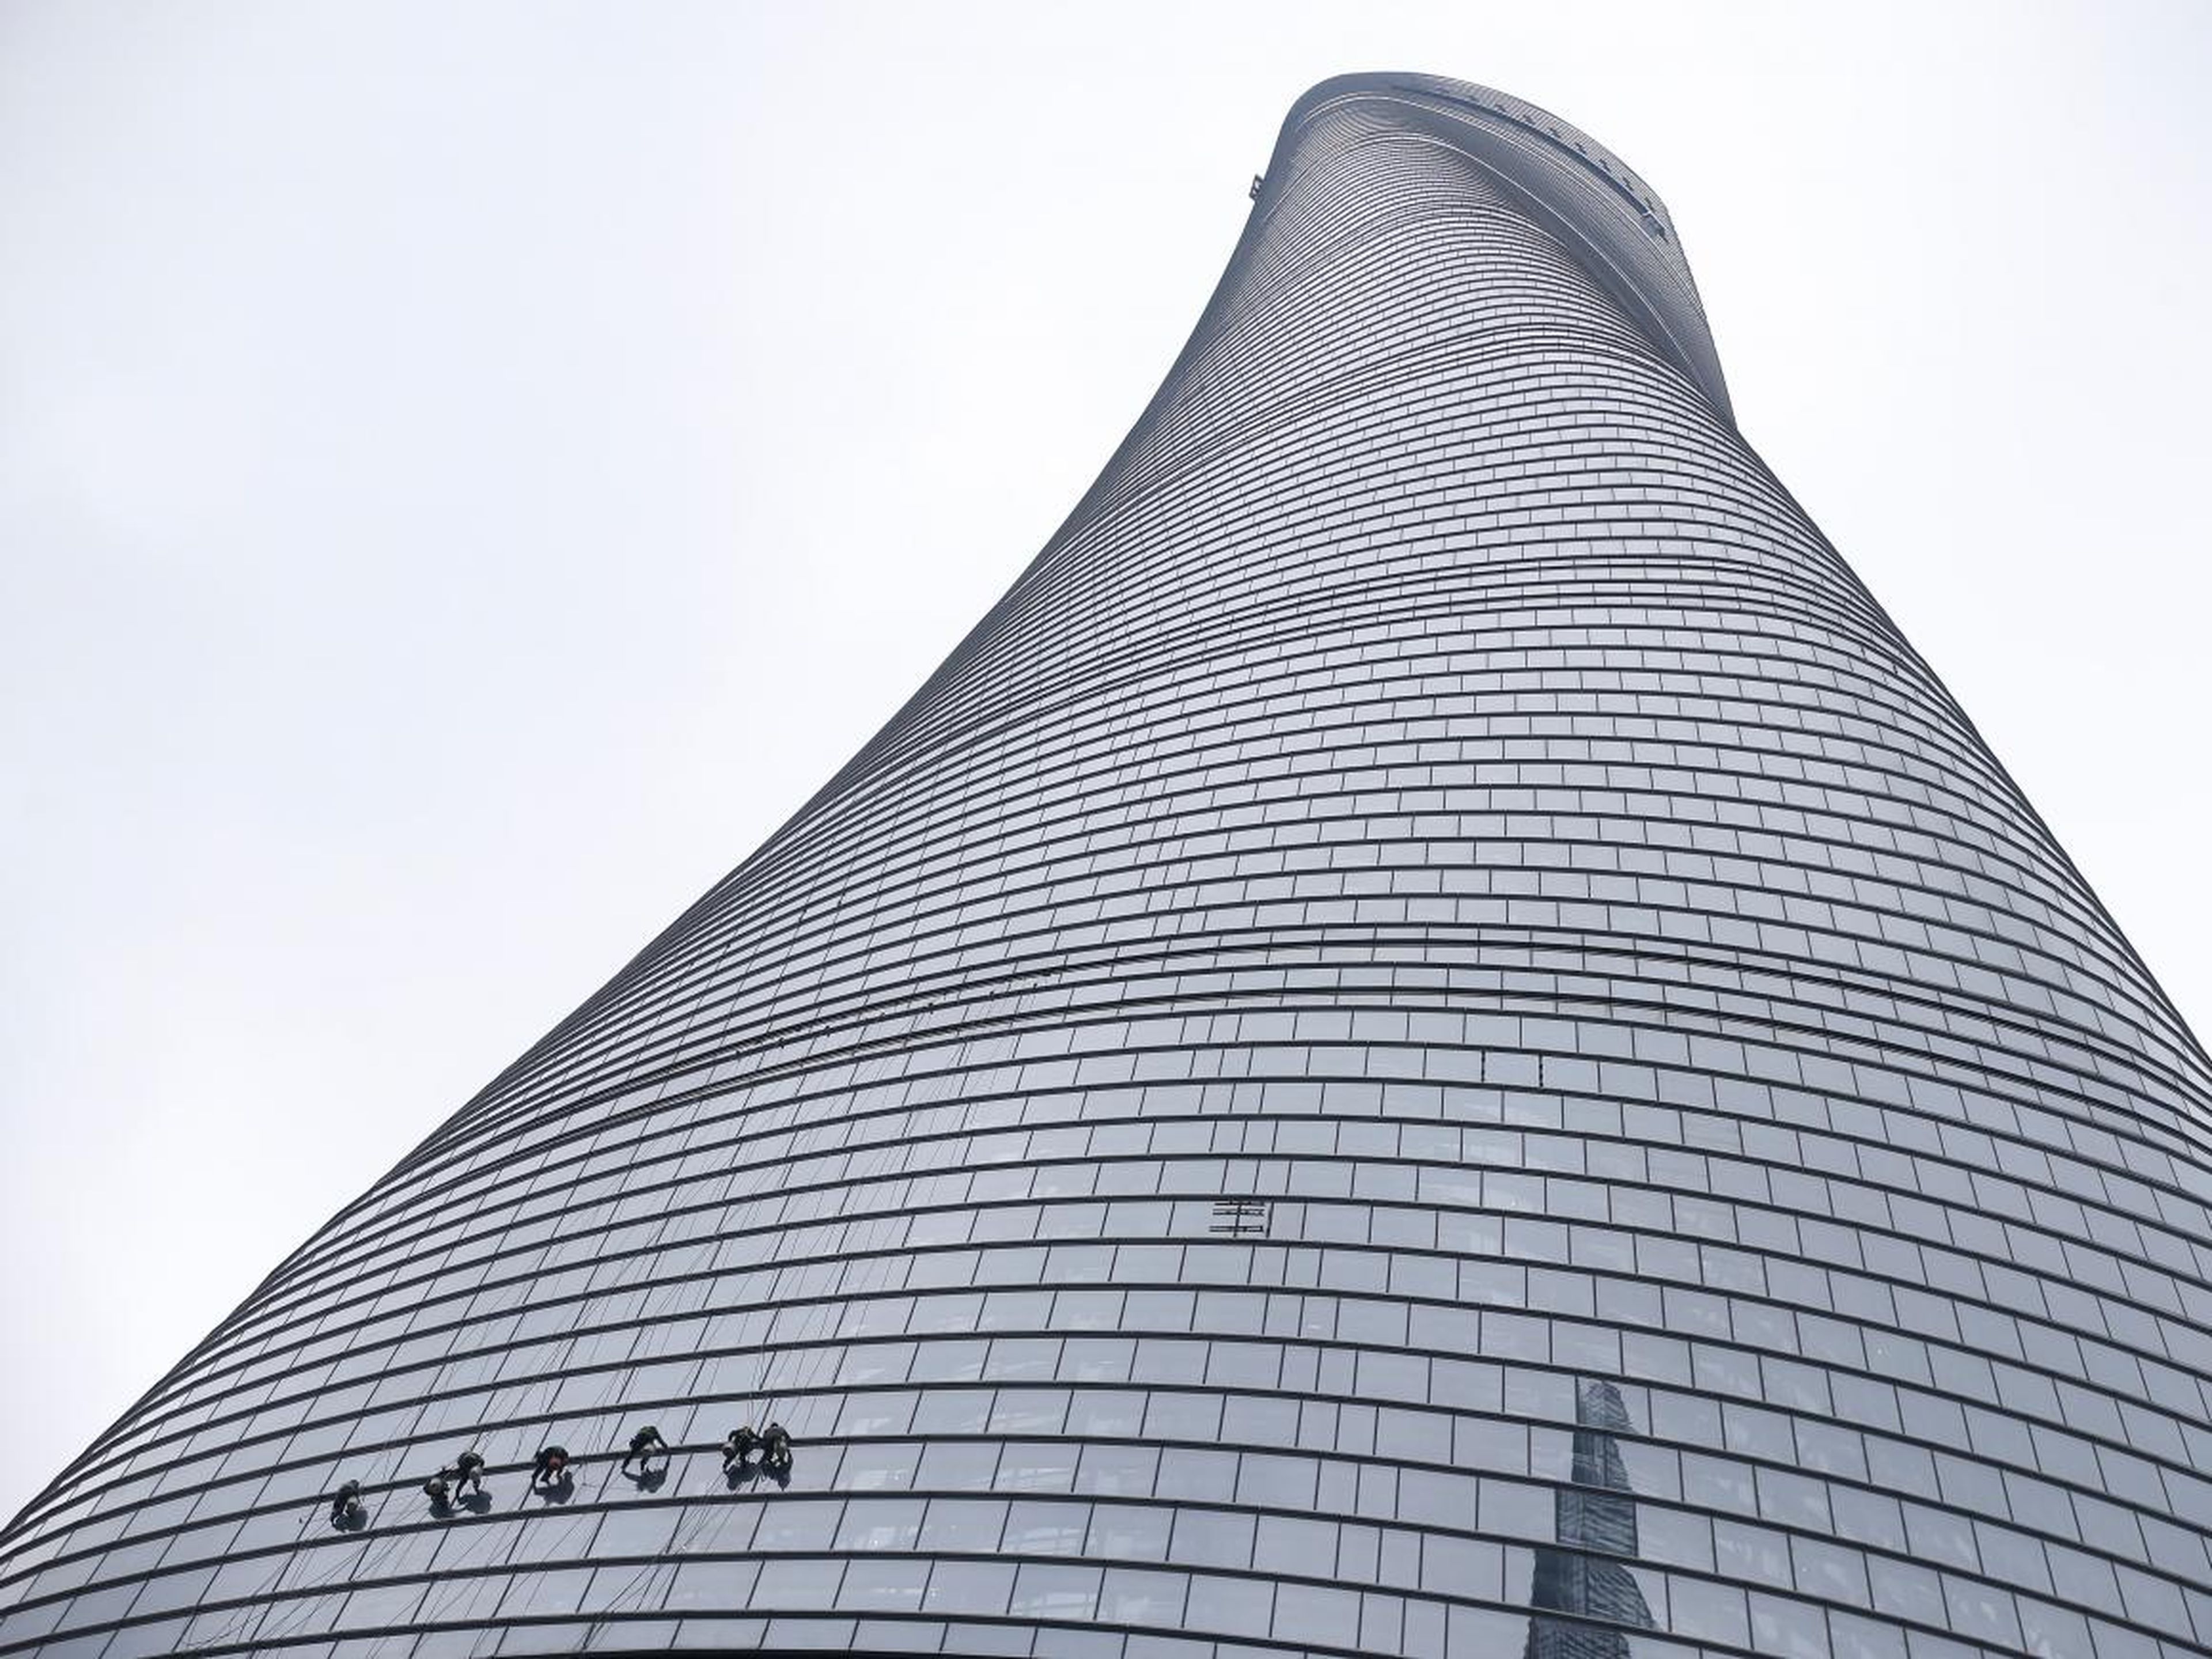 Shanghai Tower's twisted design is meant to allow it to withstand typhoon-force winds.